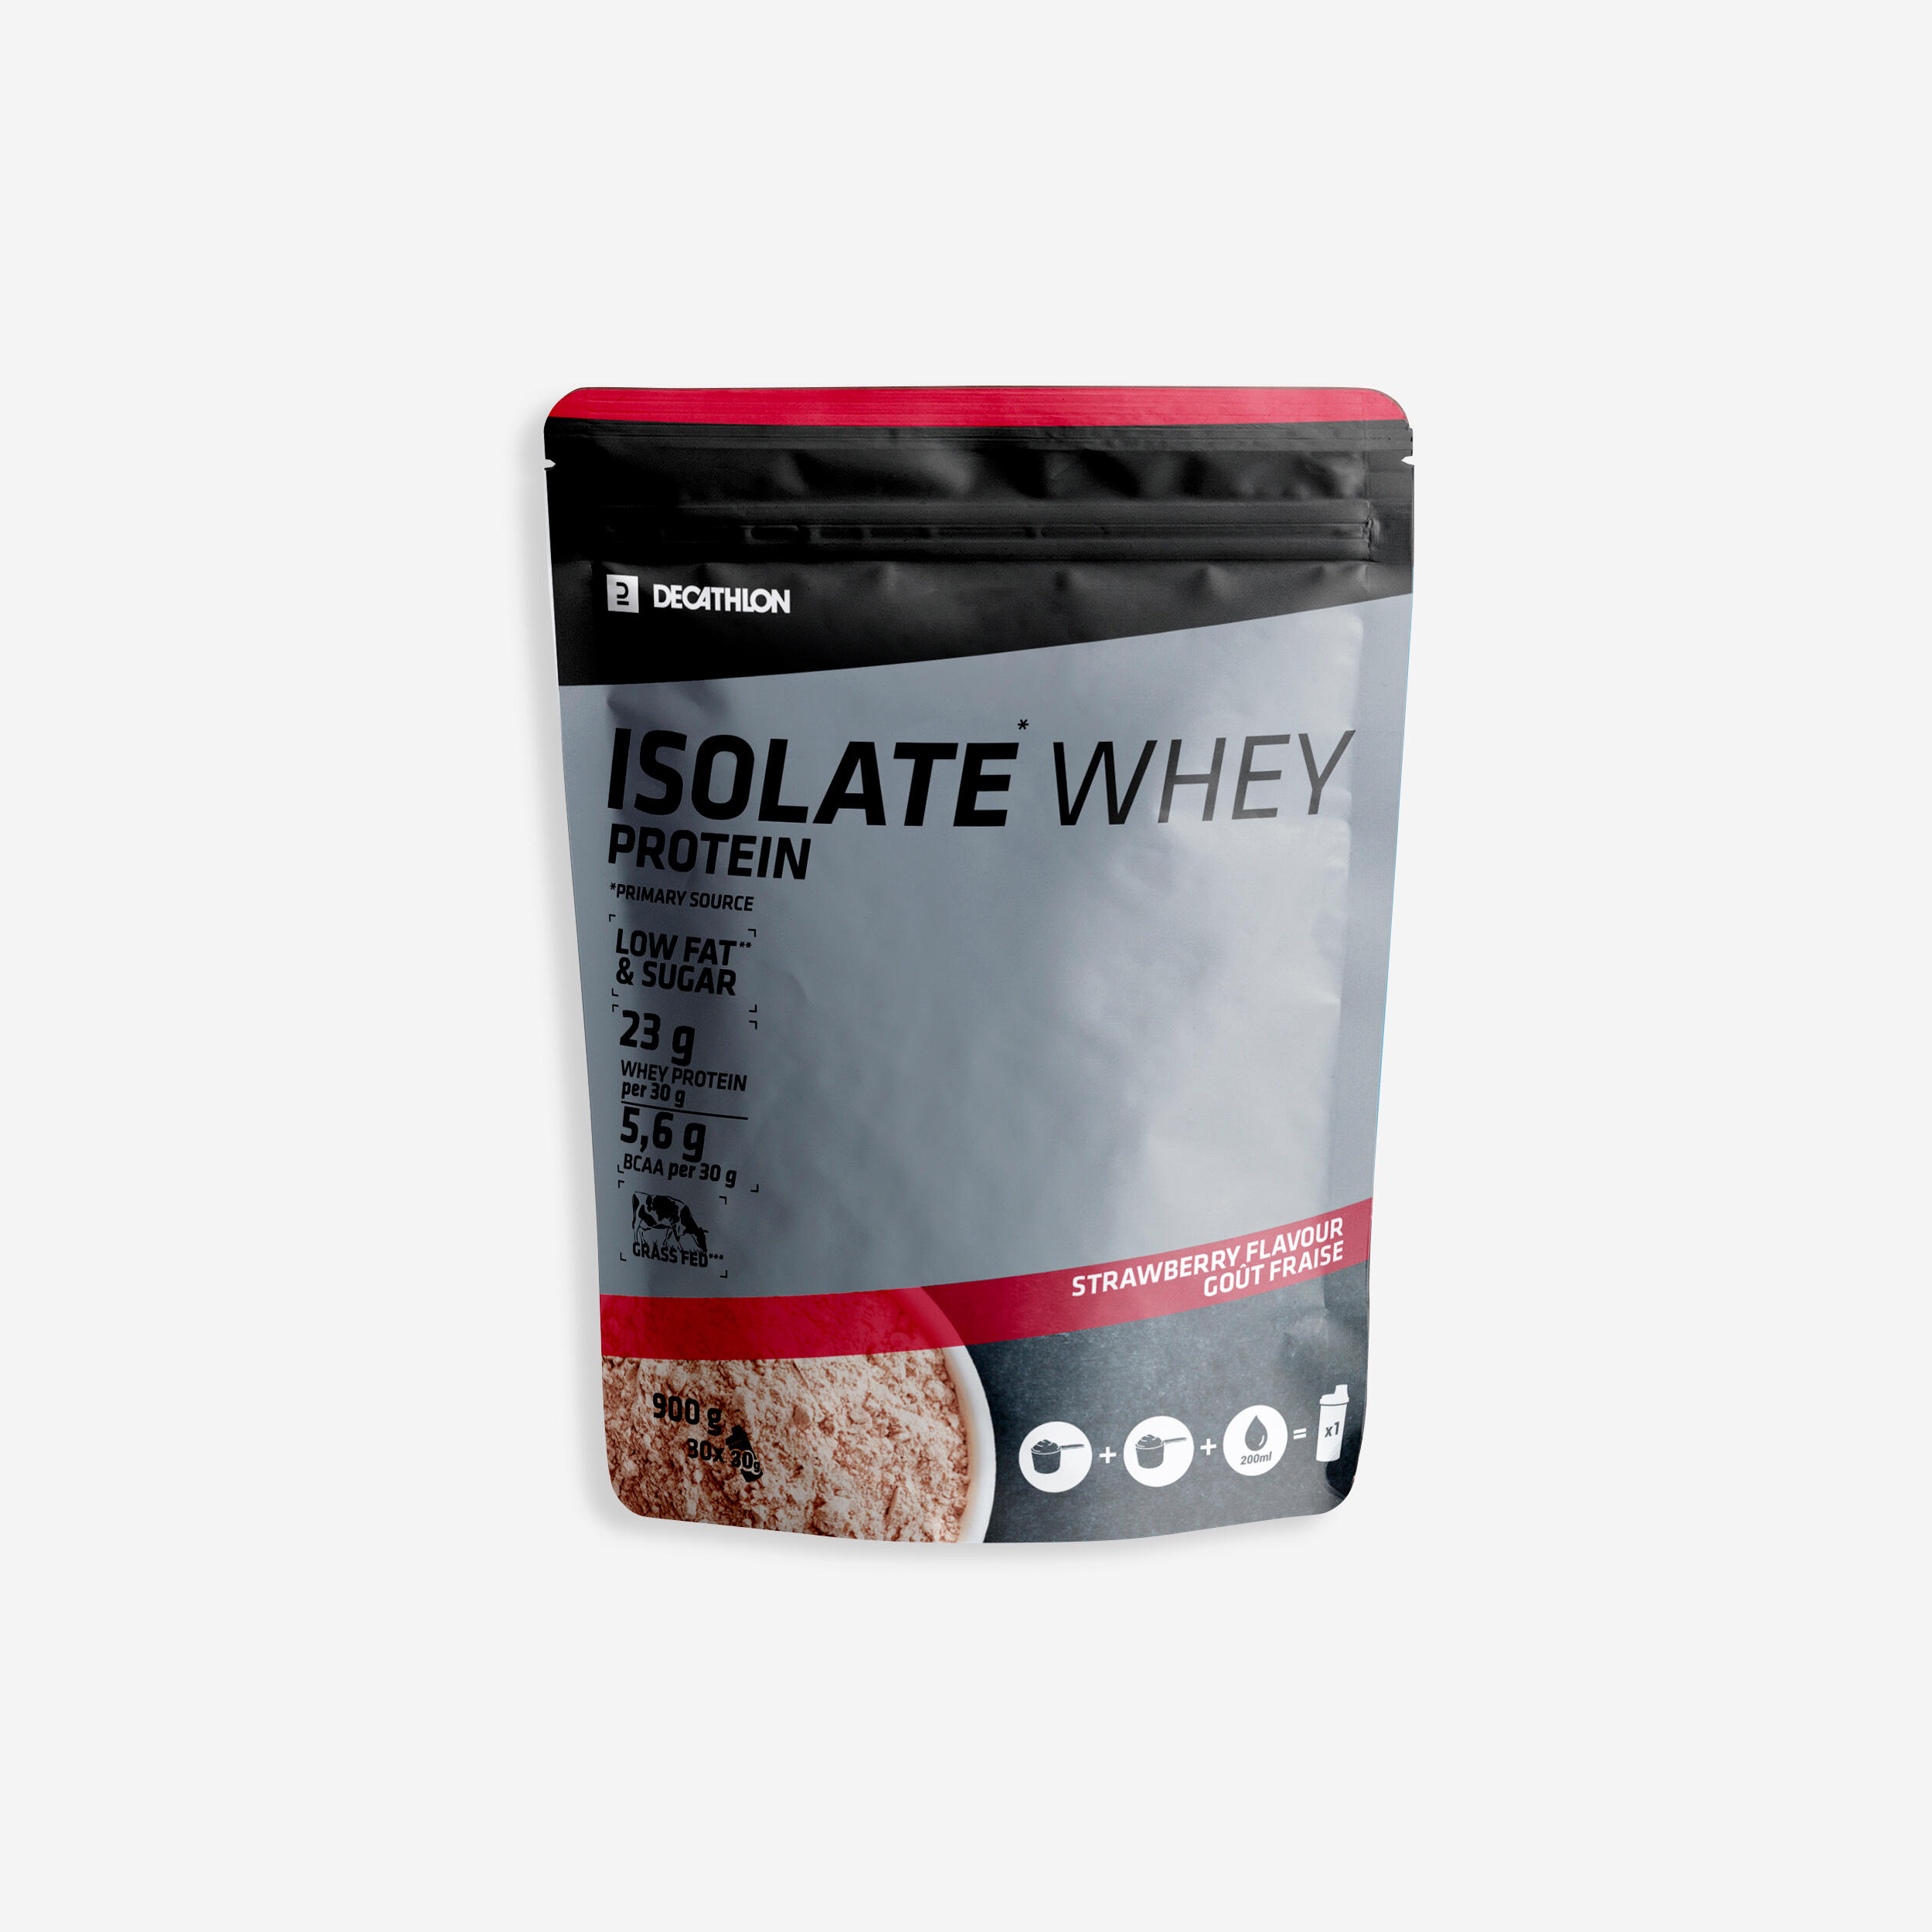 CORENGTH Whey Protein Isolate Fraise 900g -